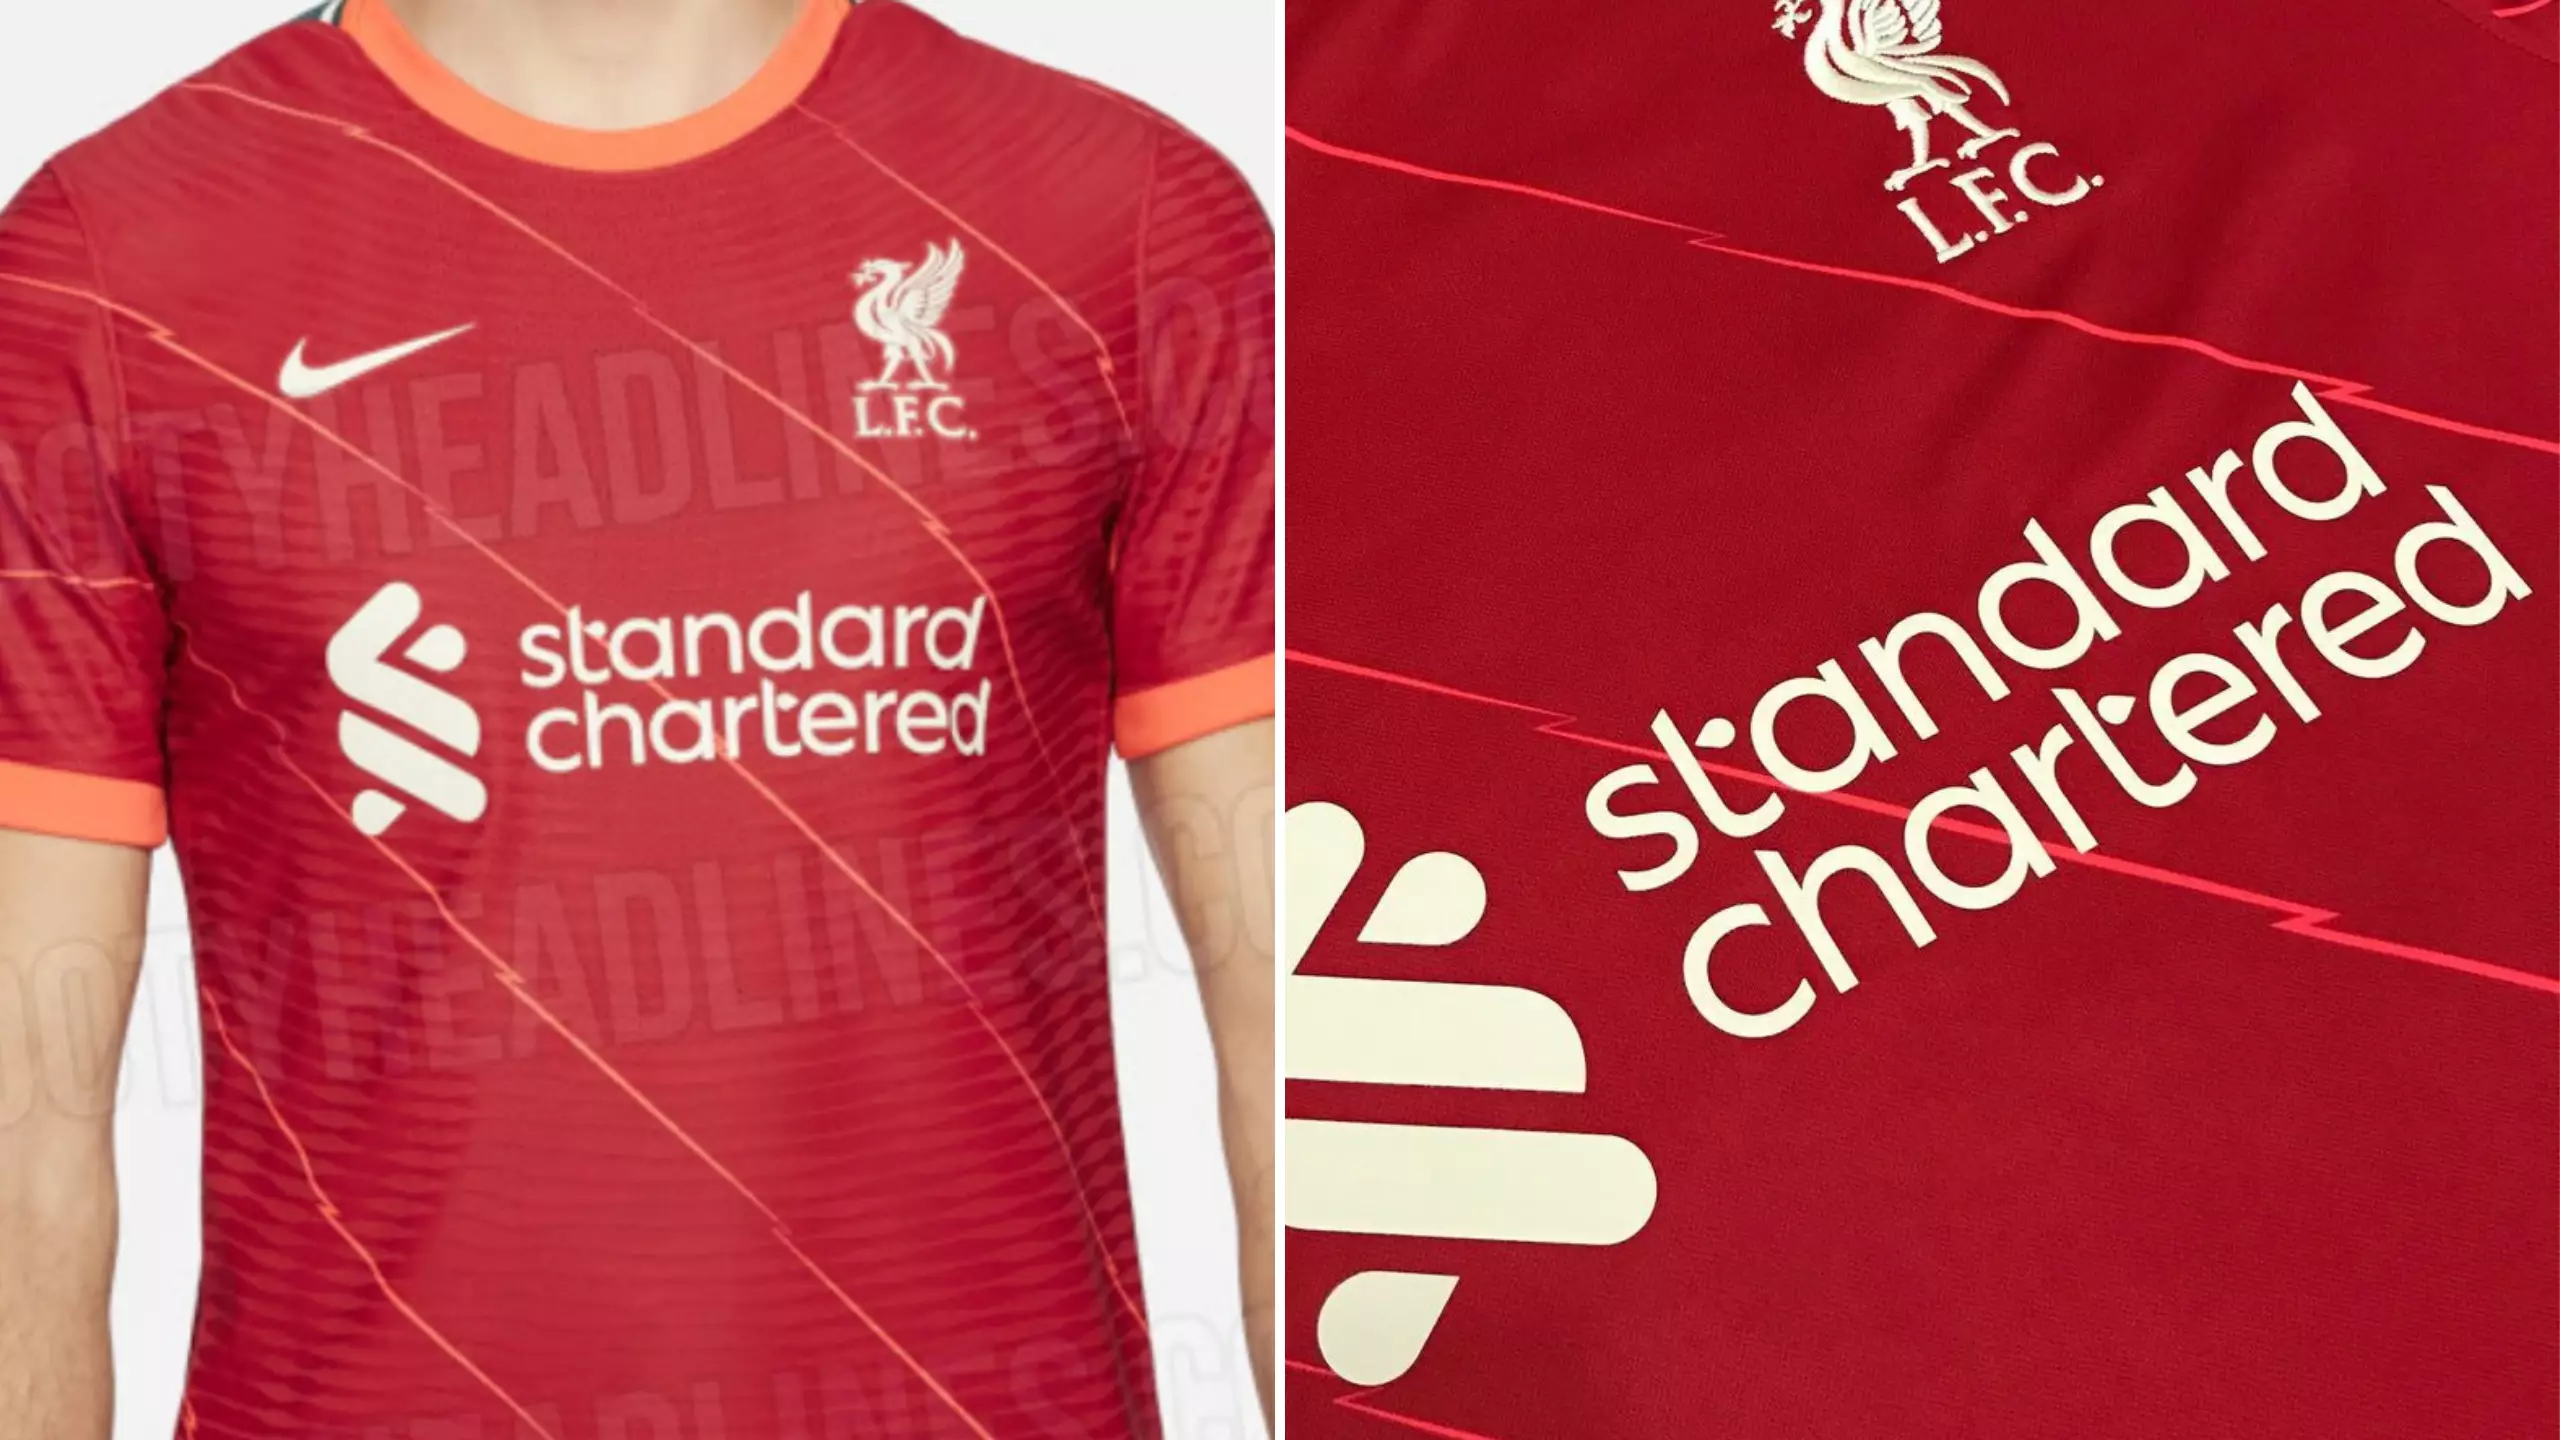 Liverpool's Official 2021/2022 Home Kit Has Leaked Online With 'Zig-Zag' Detail